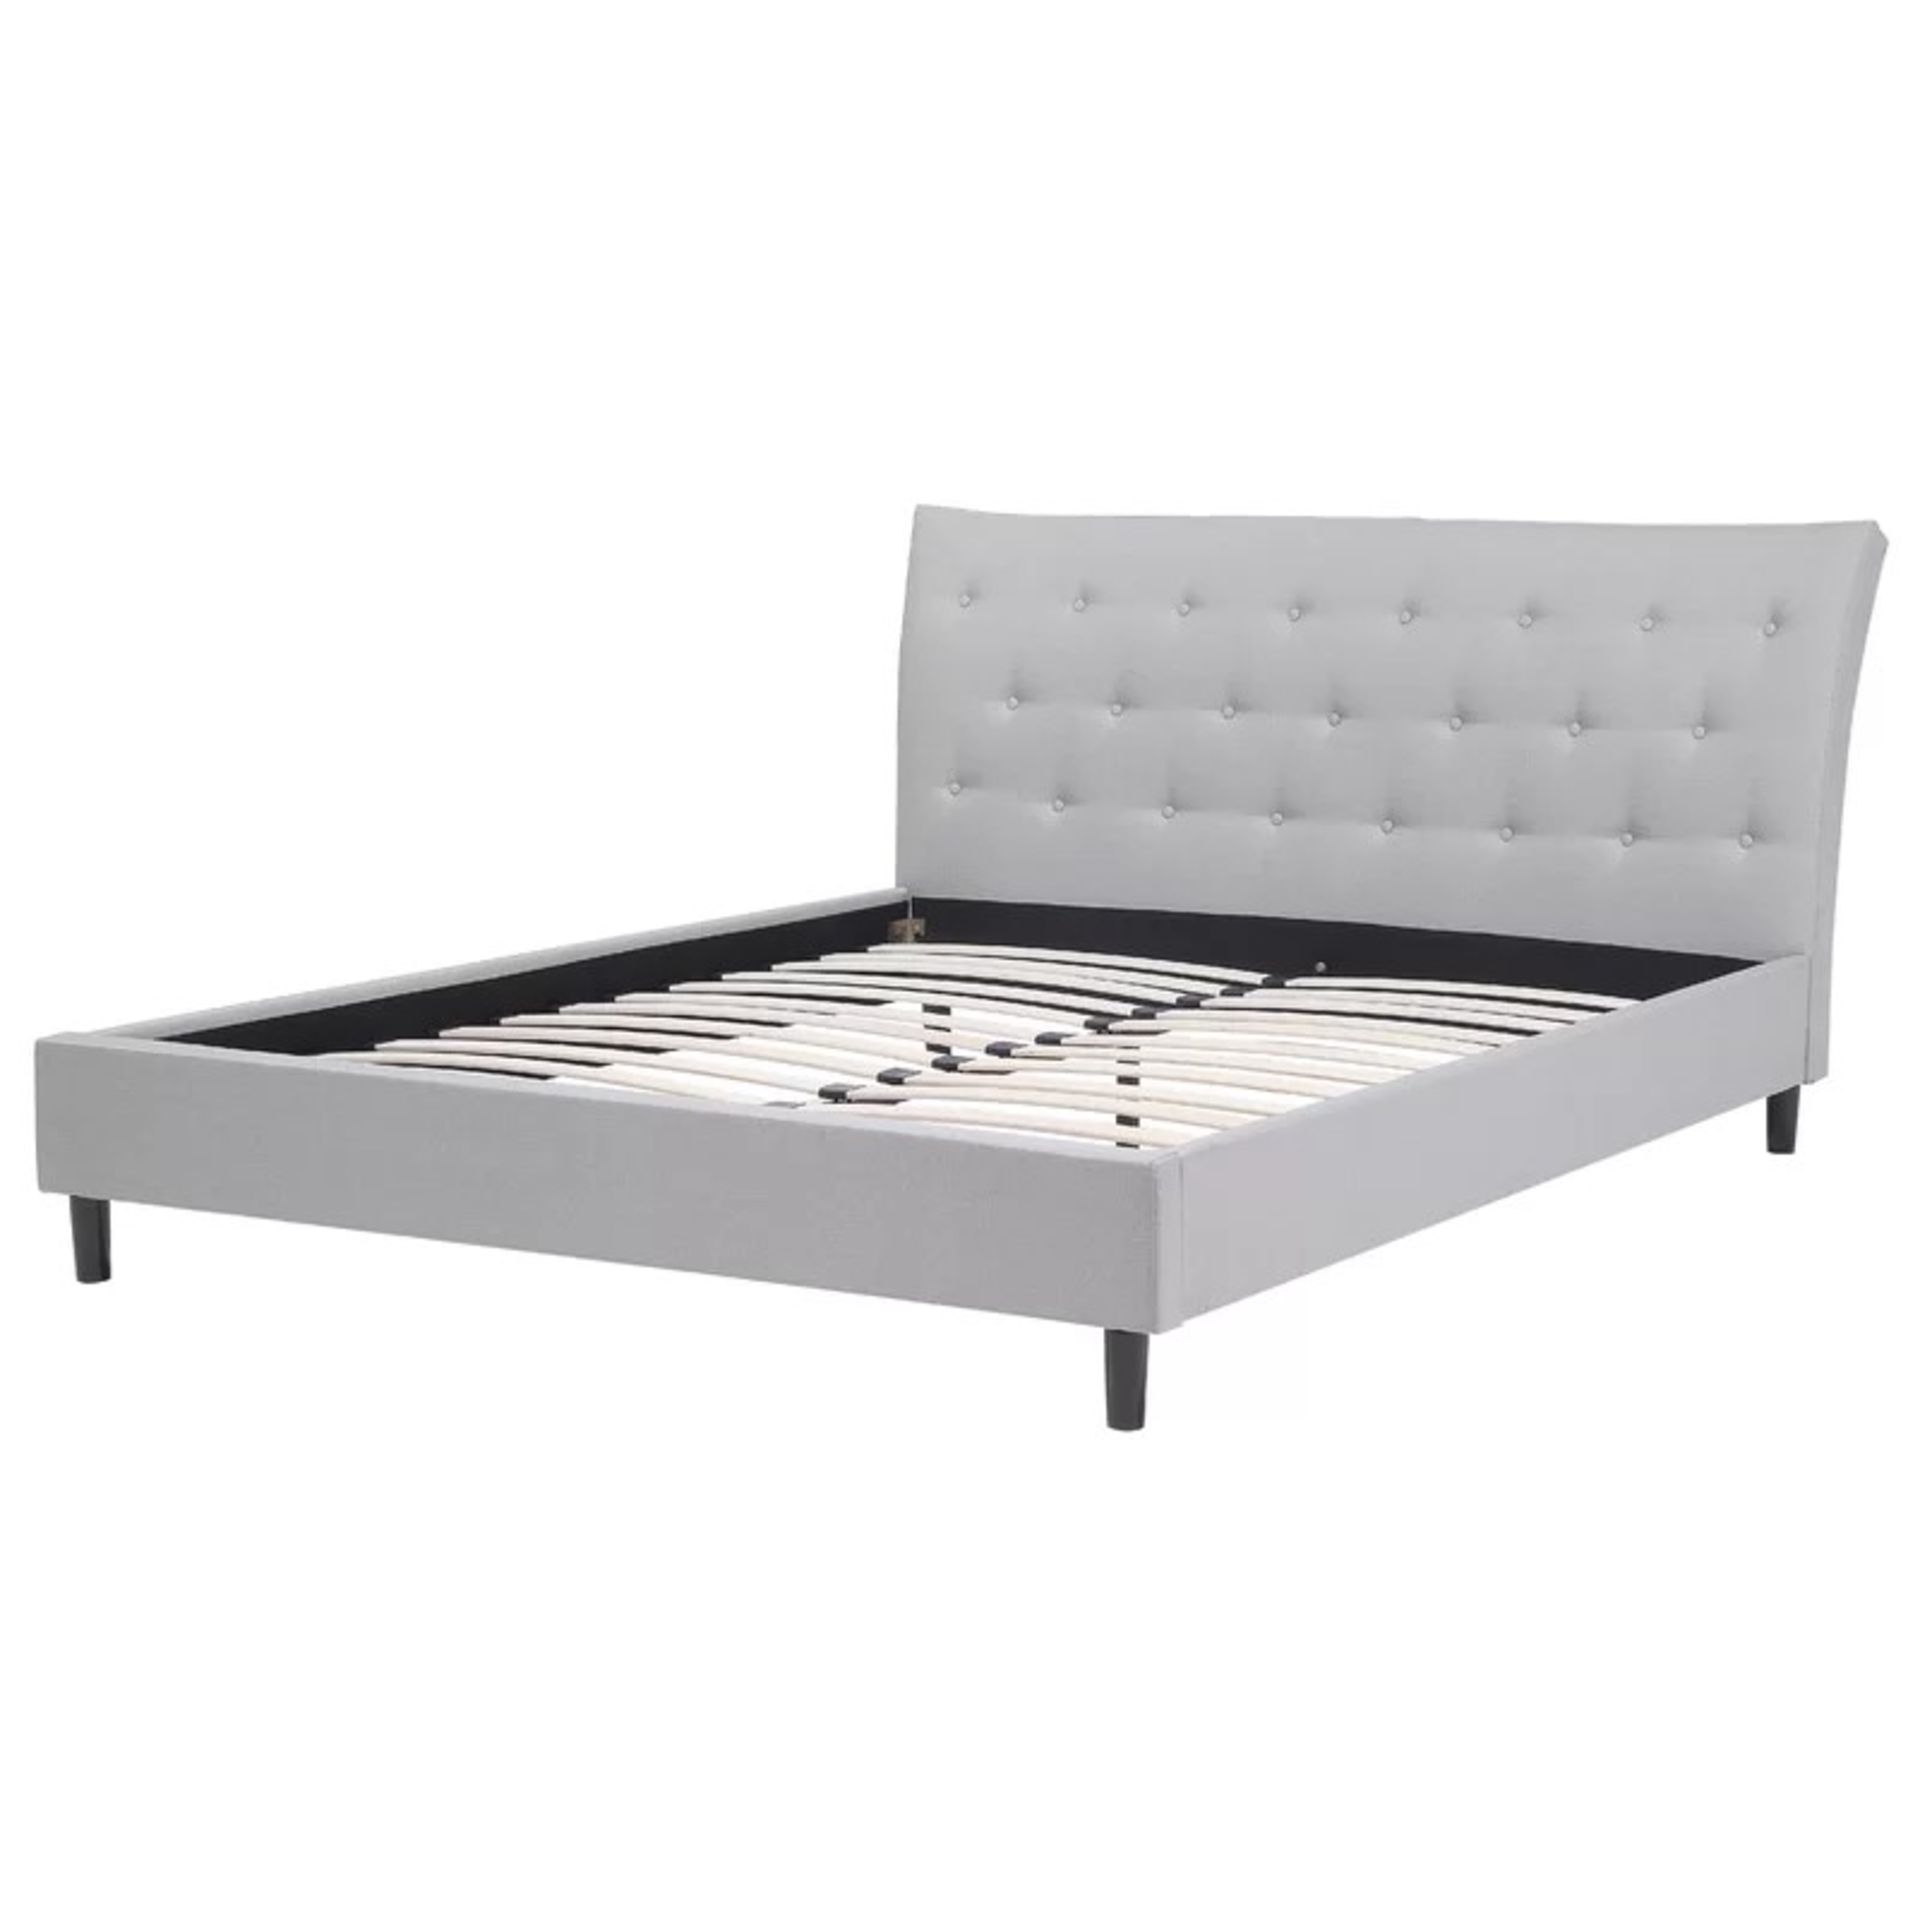 RRP £509.99 - Stolle European Double Upholstered Bed Frame - Image 2 of 4